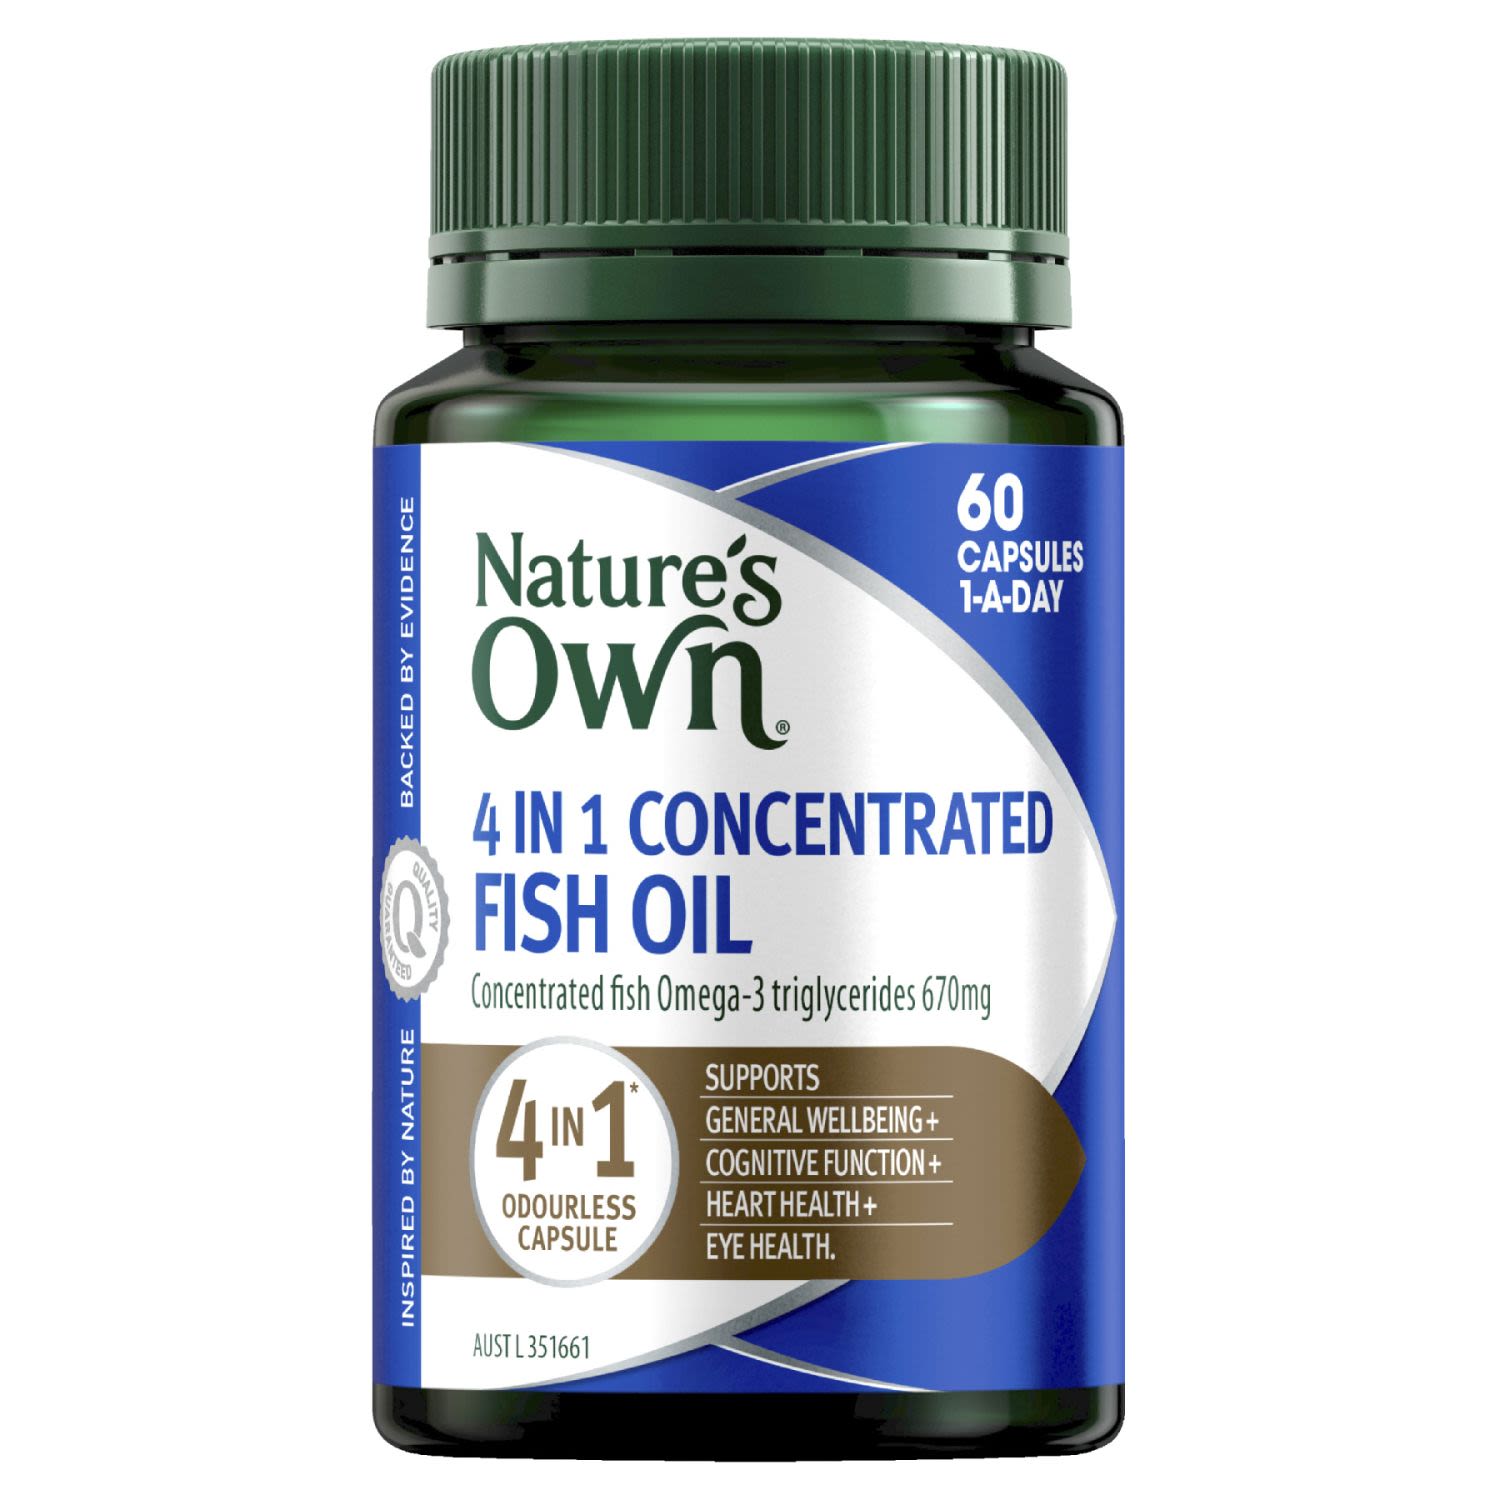 Nature's Own 4 in 1 Concentrated Fish Oil, 60 Each